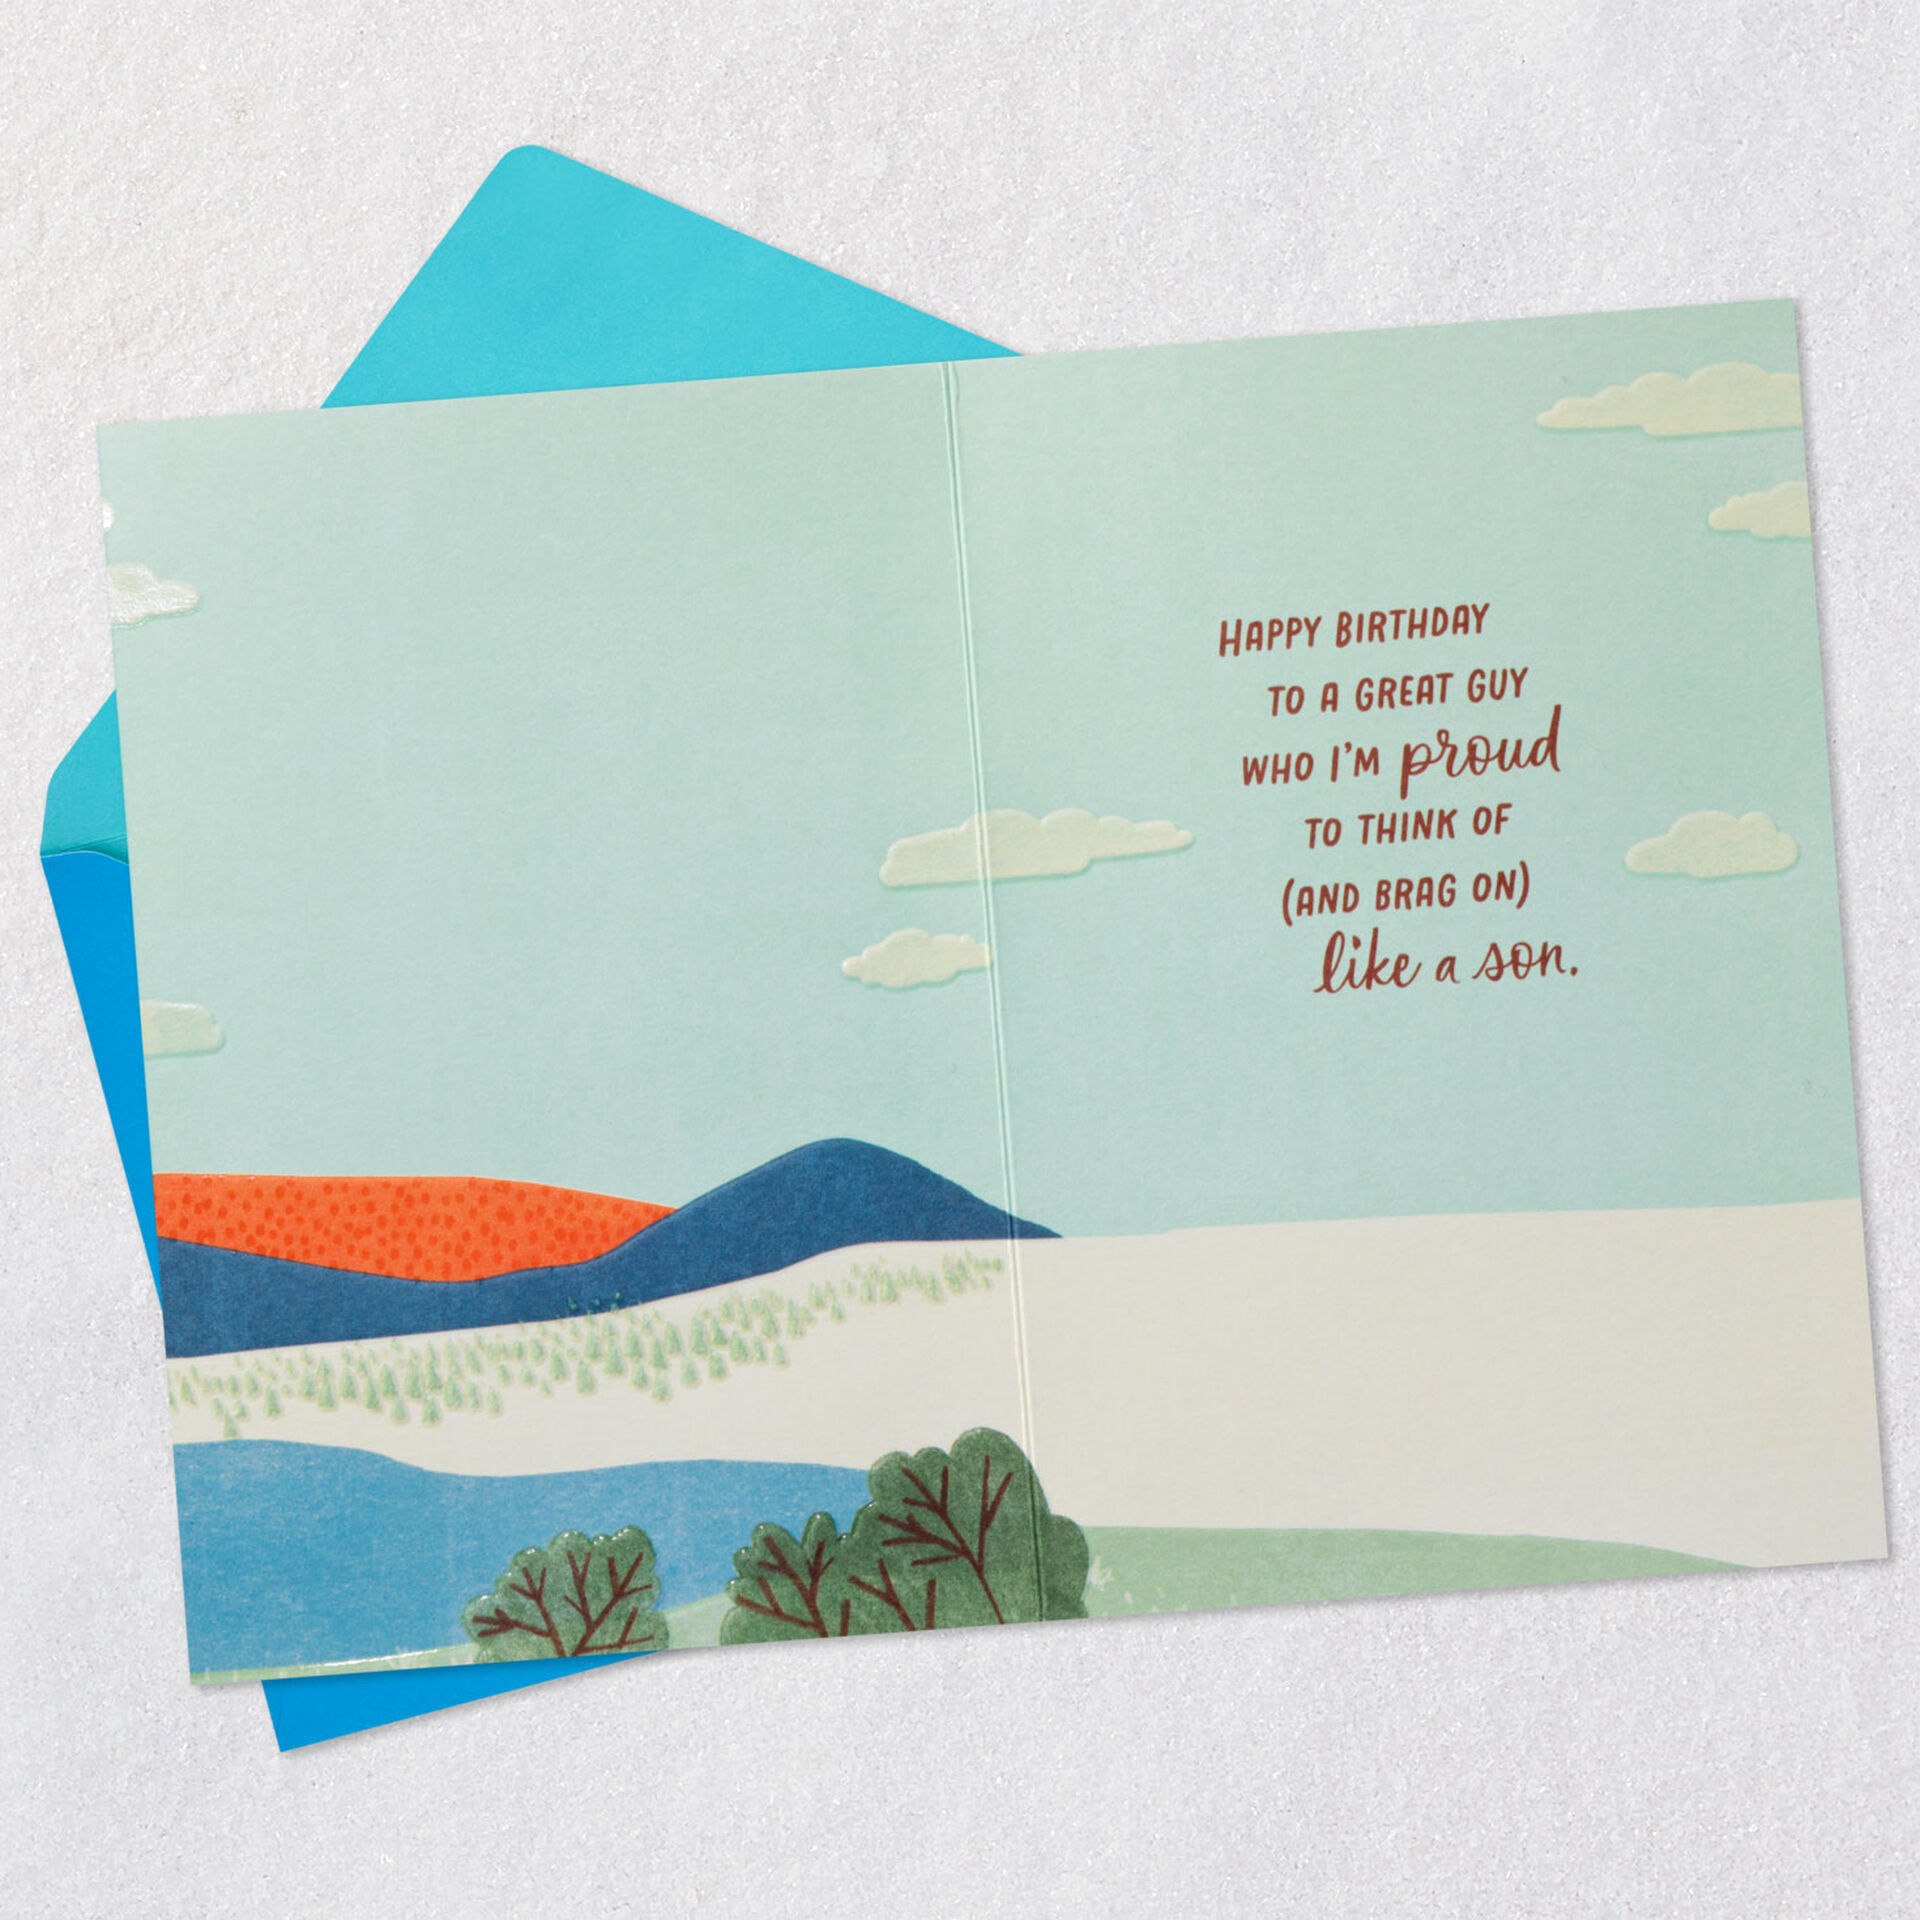 Sunset-Landscape-Like-a-Son-Birthday-Card-for-Him_299MAN3916_03